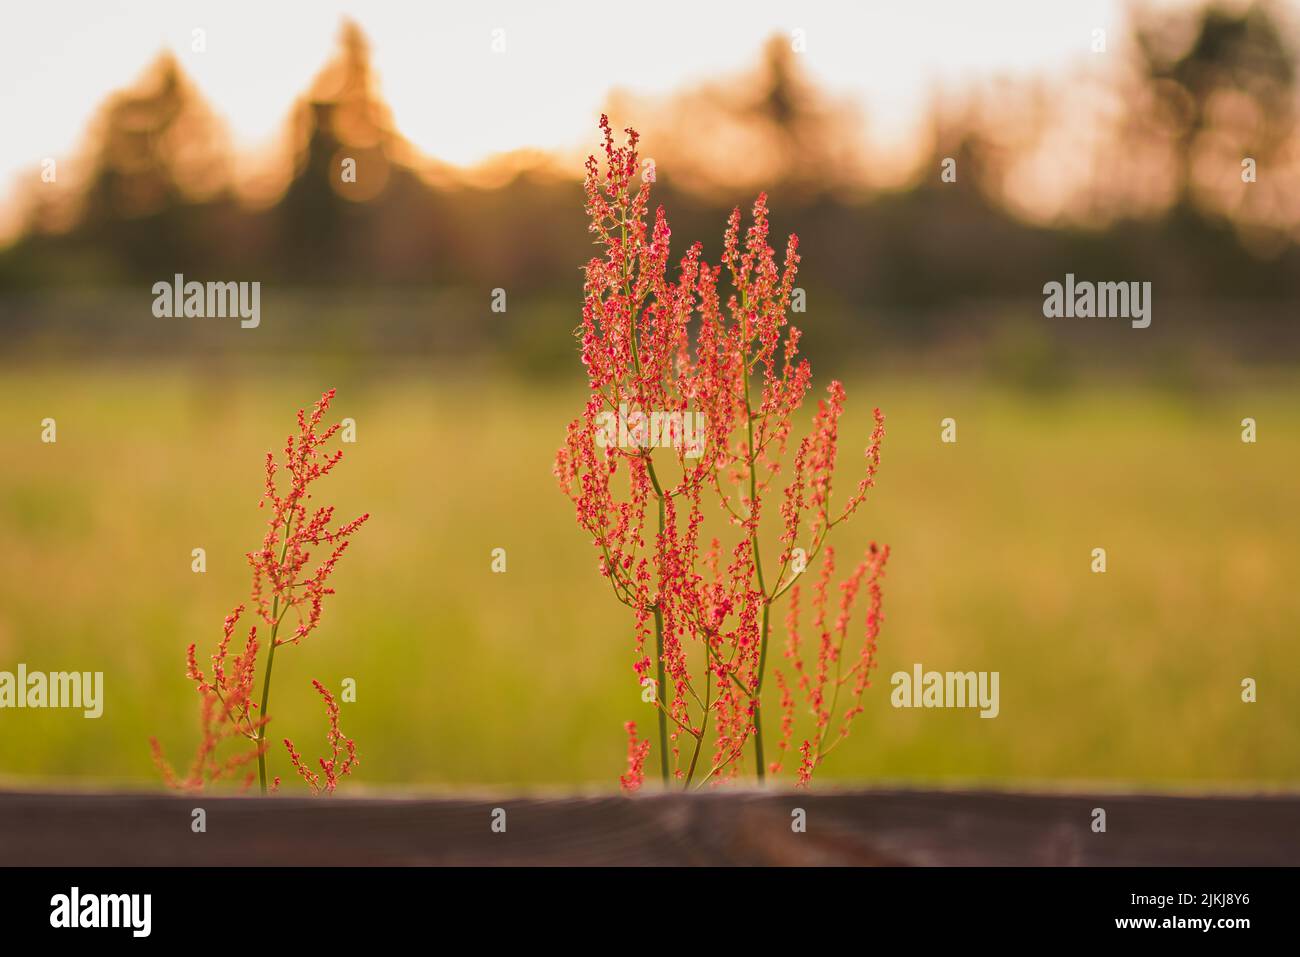 A closeup shot of red sorrel plants in the field at sunset with blurred background Stock Photo